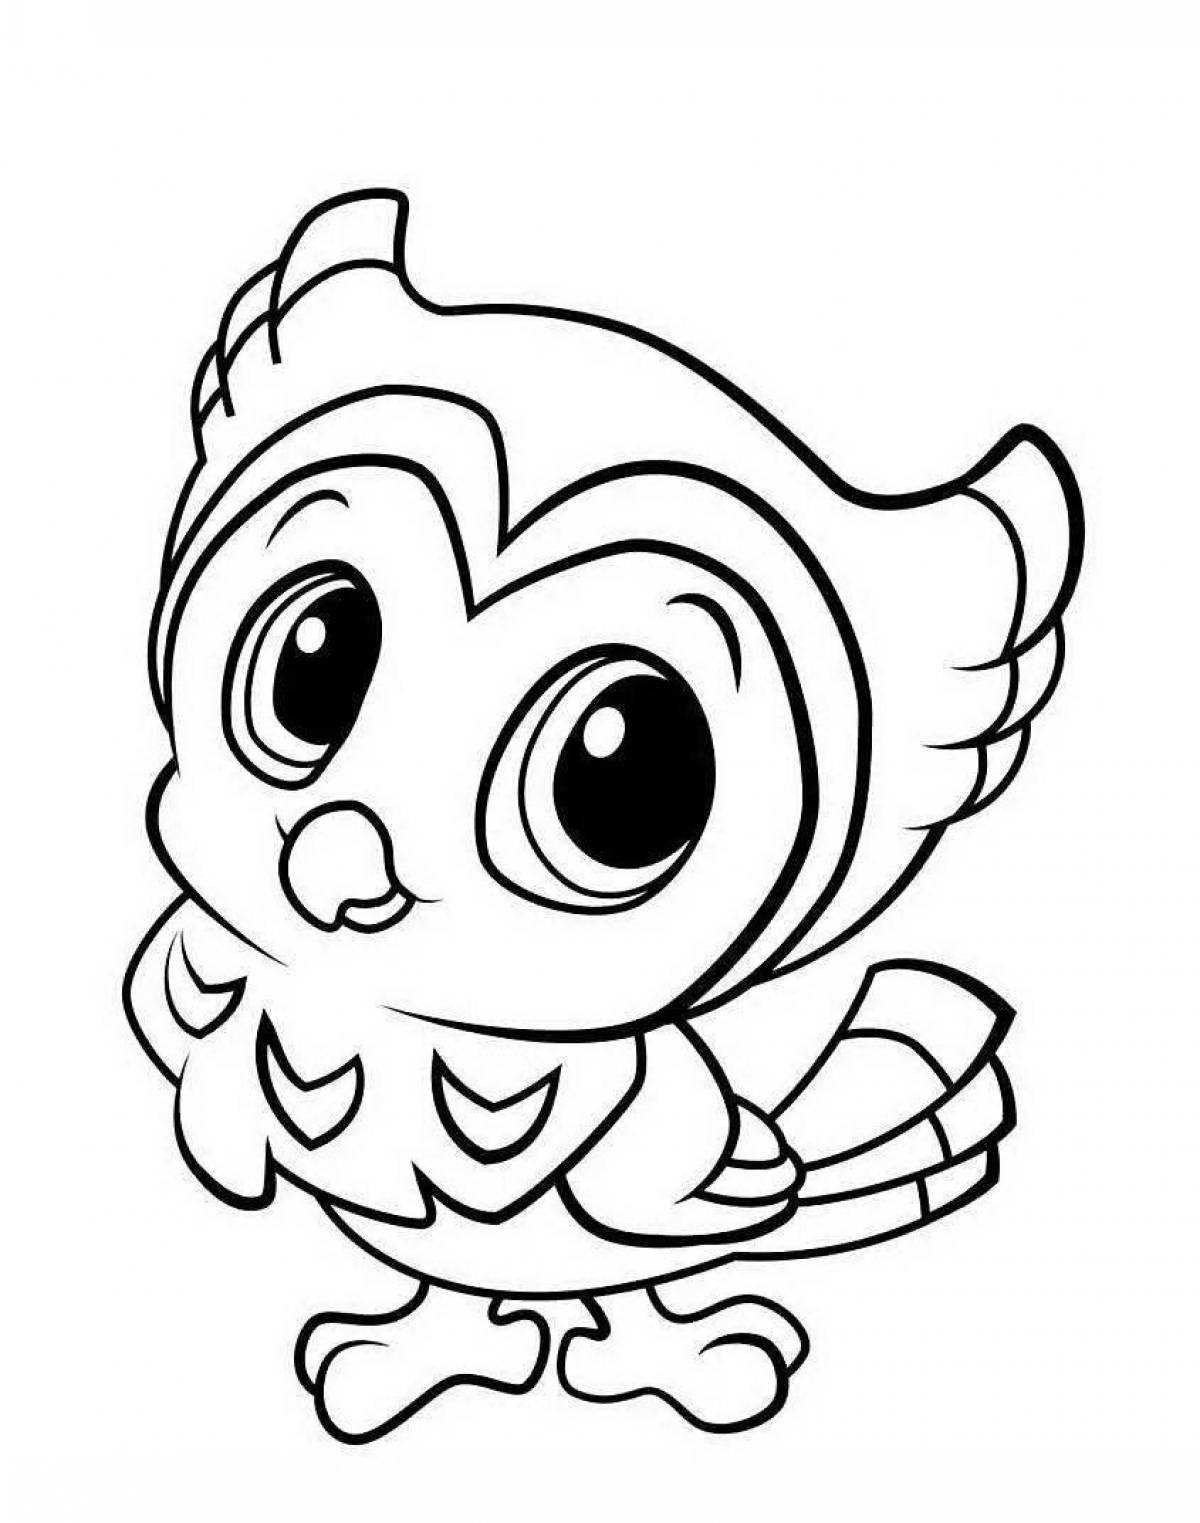 A funny owl coloring book for girls